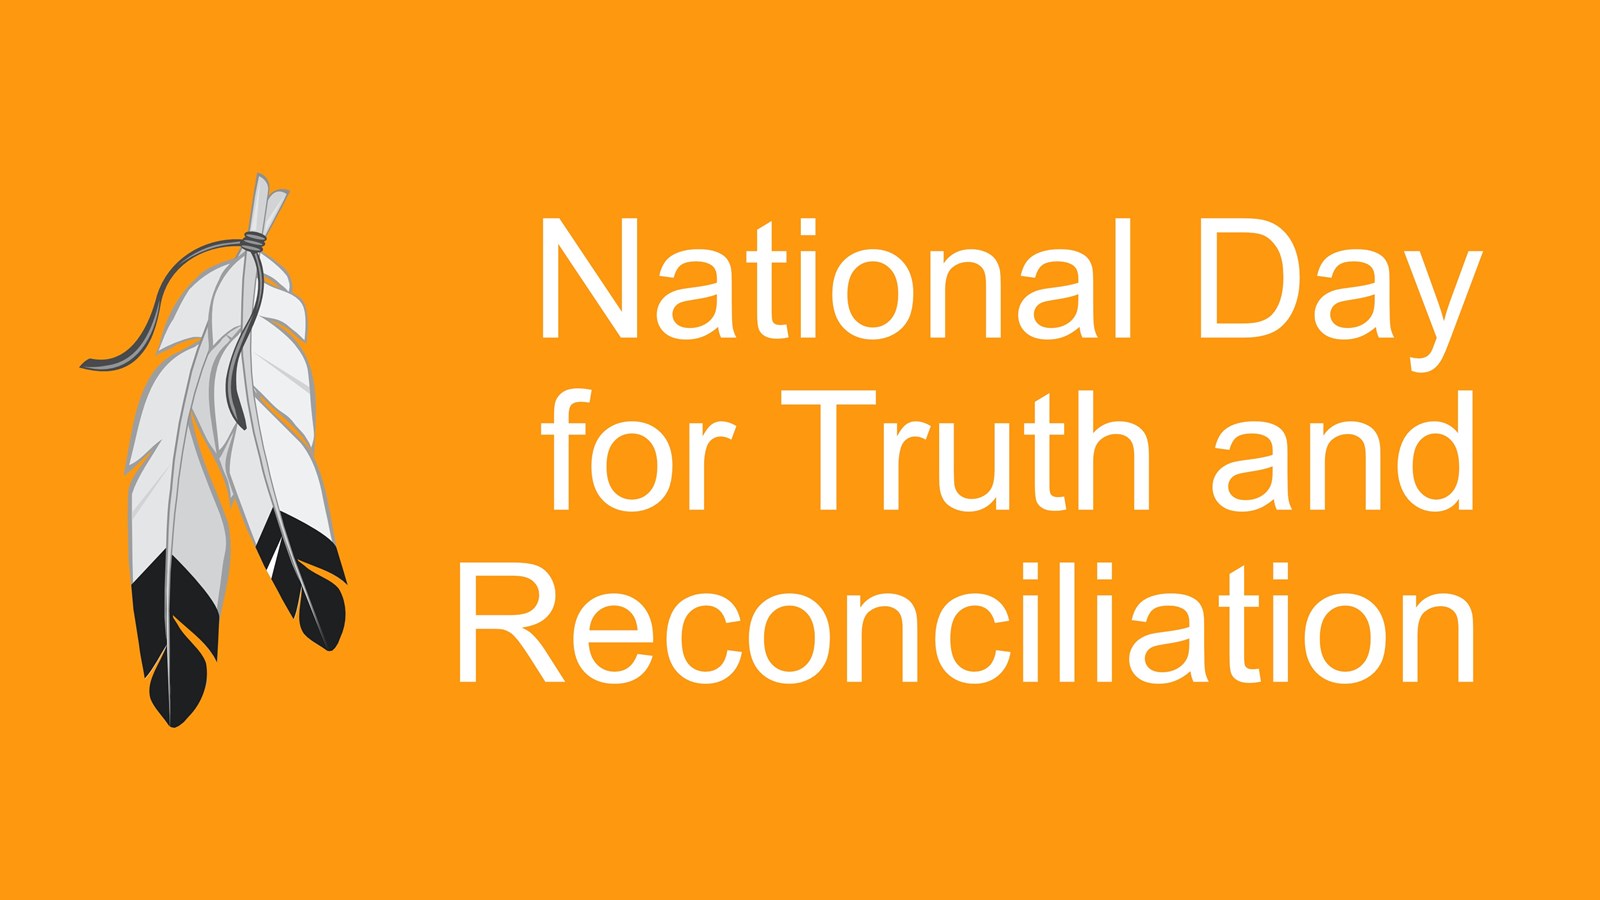 Graphic with white text on an orange background that reads "National Day for Truth and Reconciliation" accompanied by an illustration of two eagle feathers.